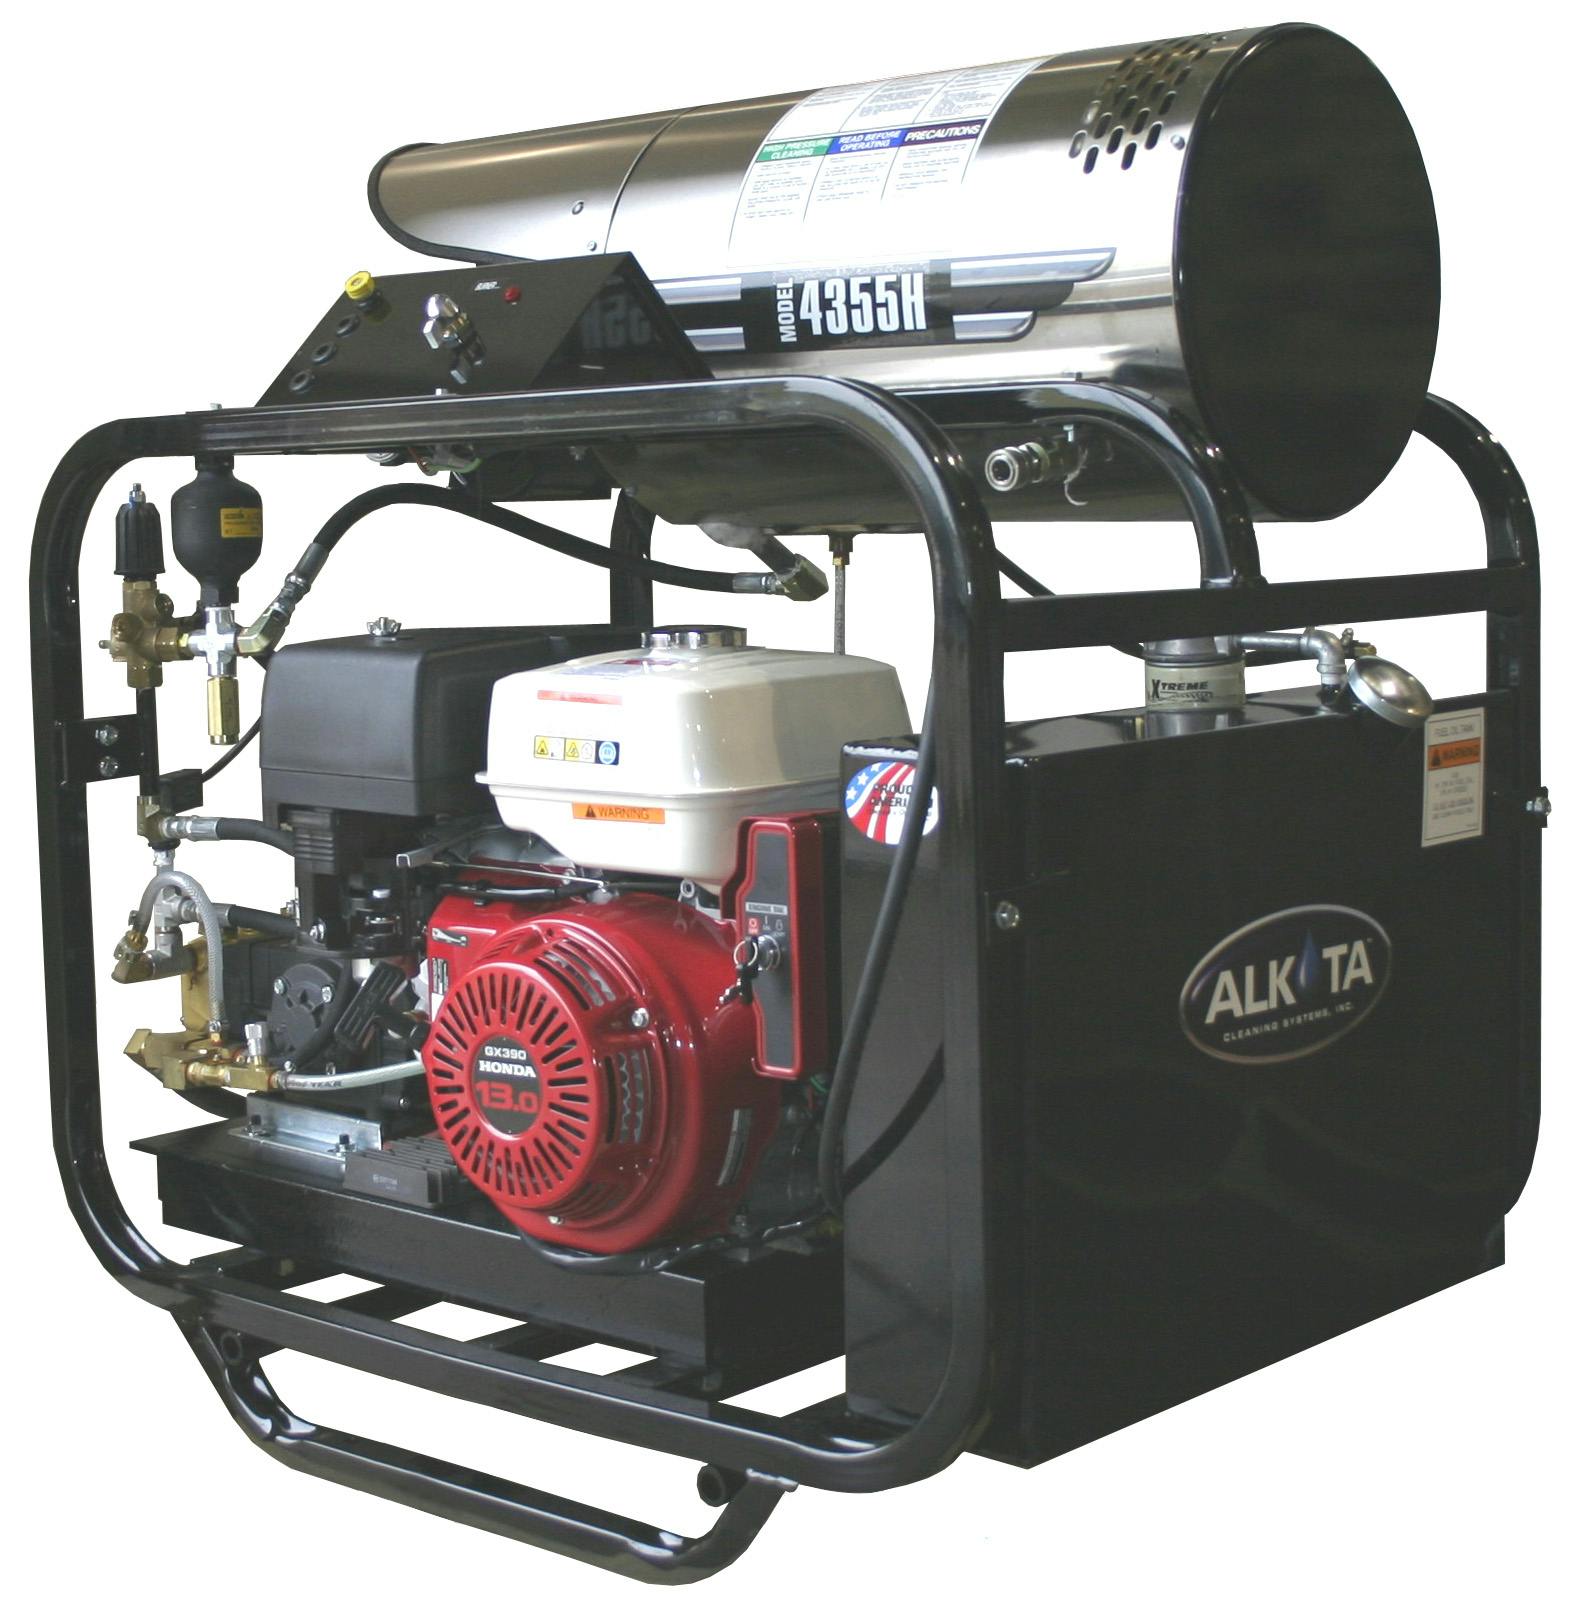 Heated Pressure Washer Gas Engine 4355H Alkota for Sale in Houston